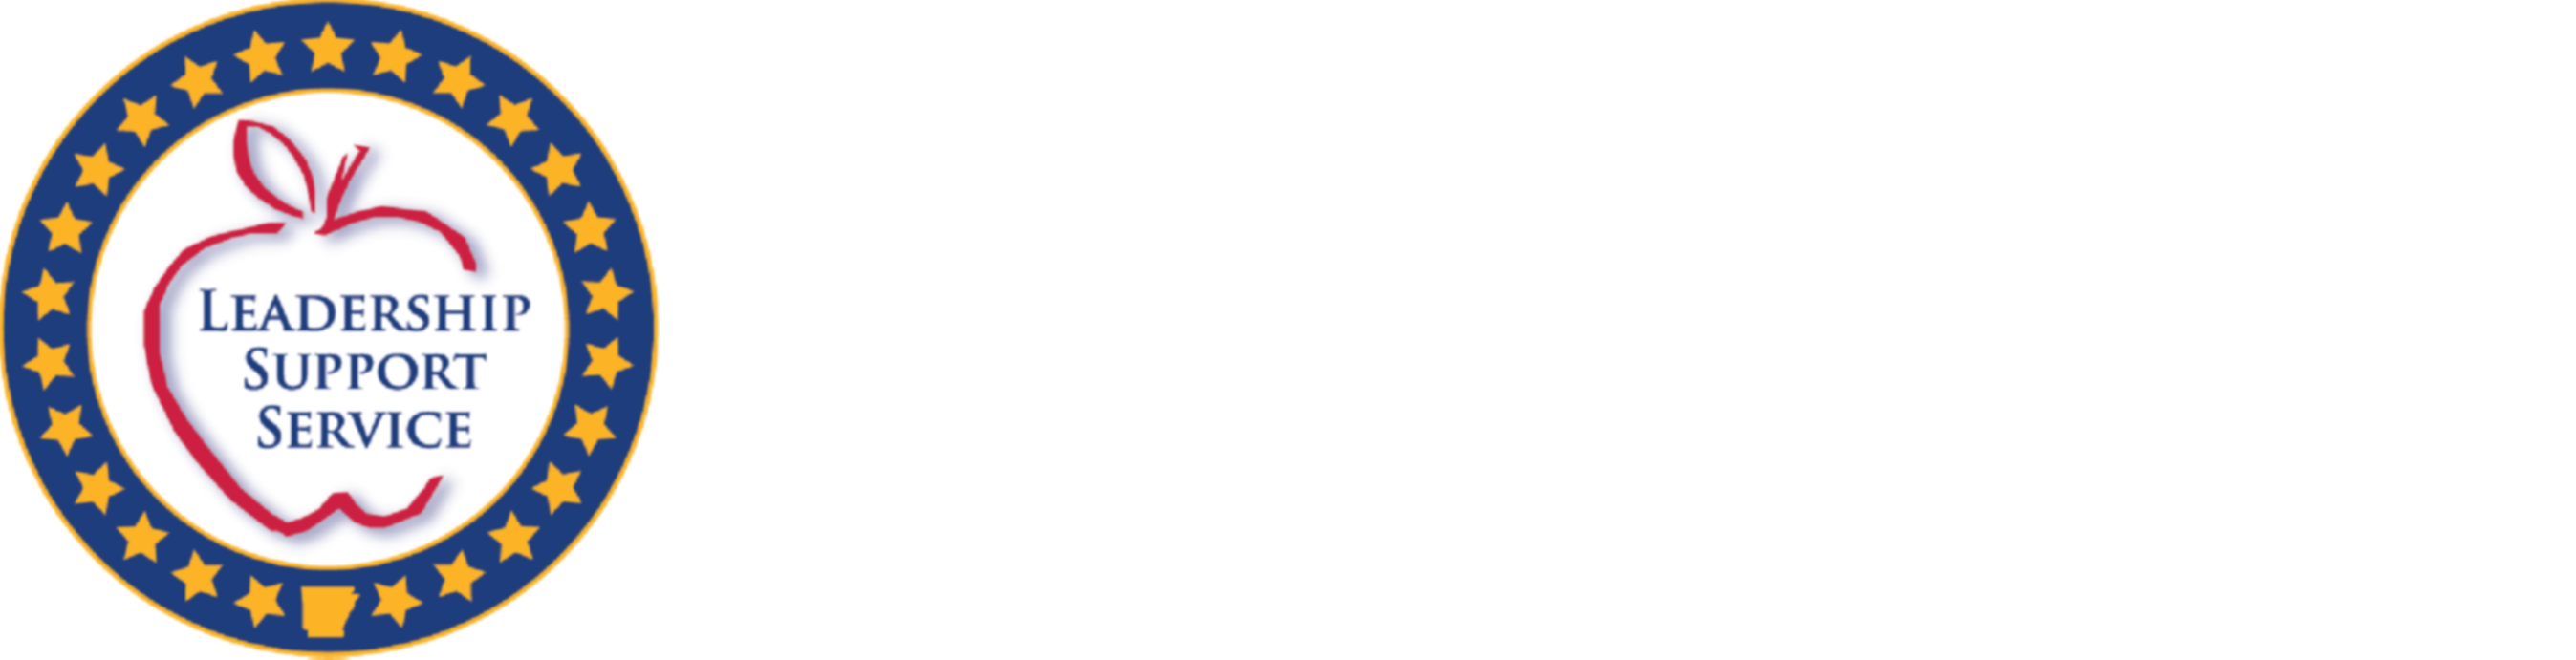 Dept of Education State Required Information